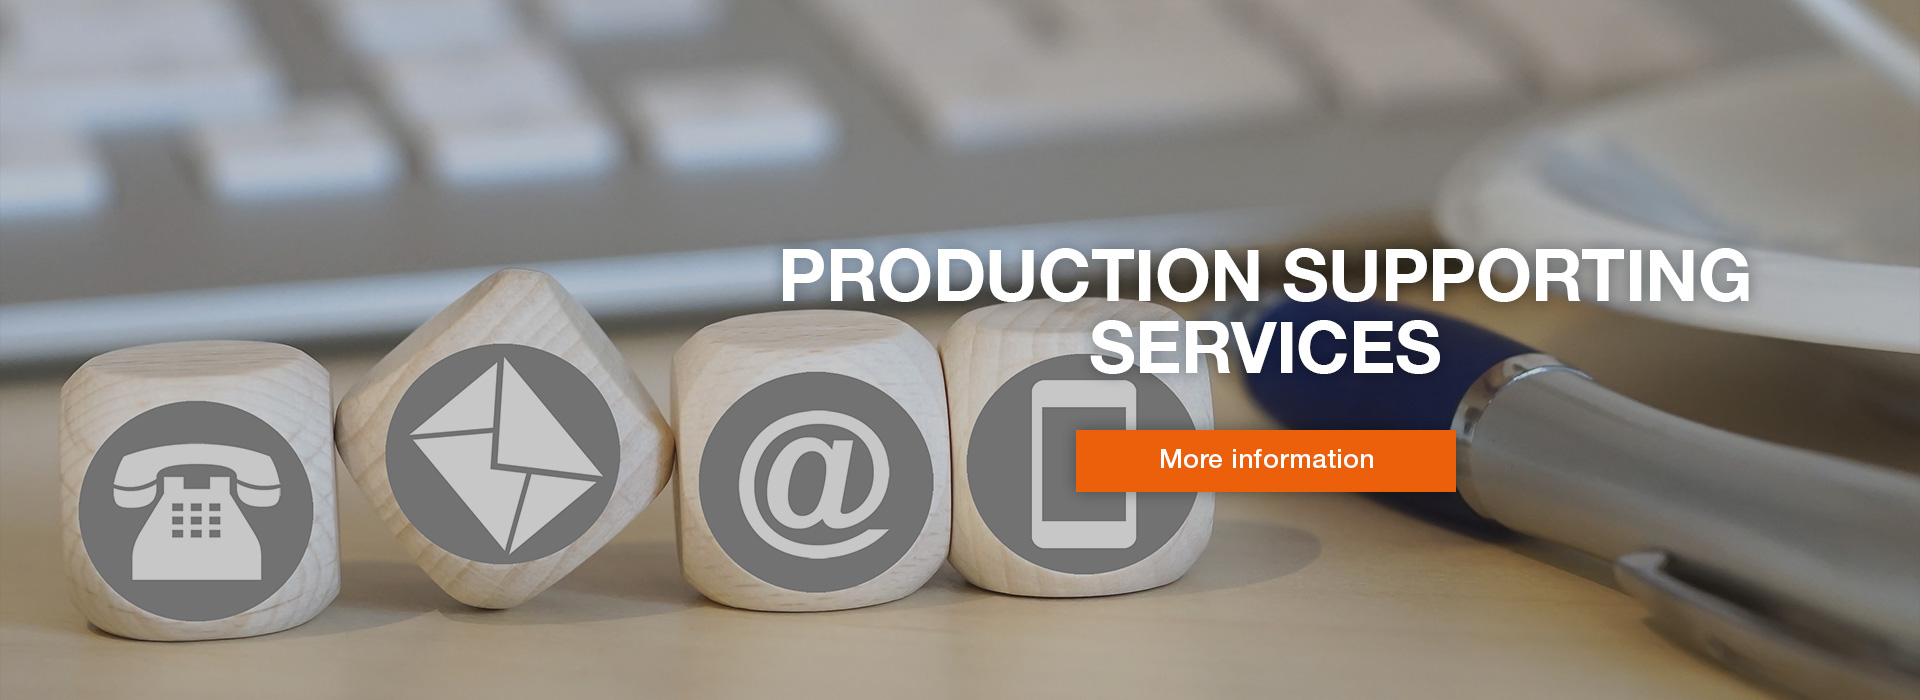 Production Supporting Services